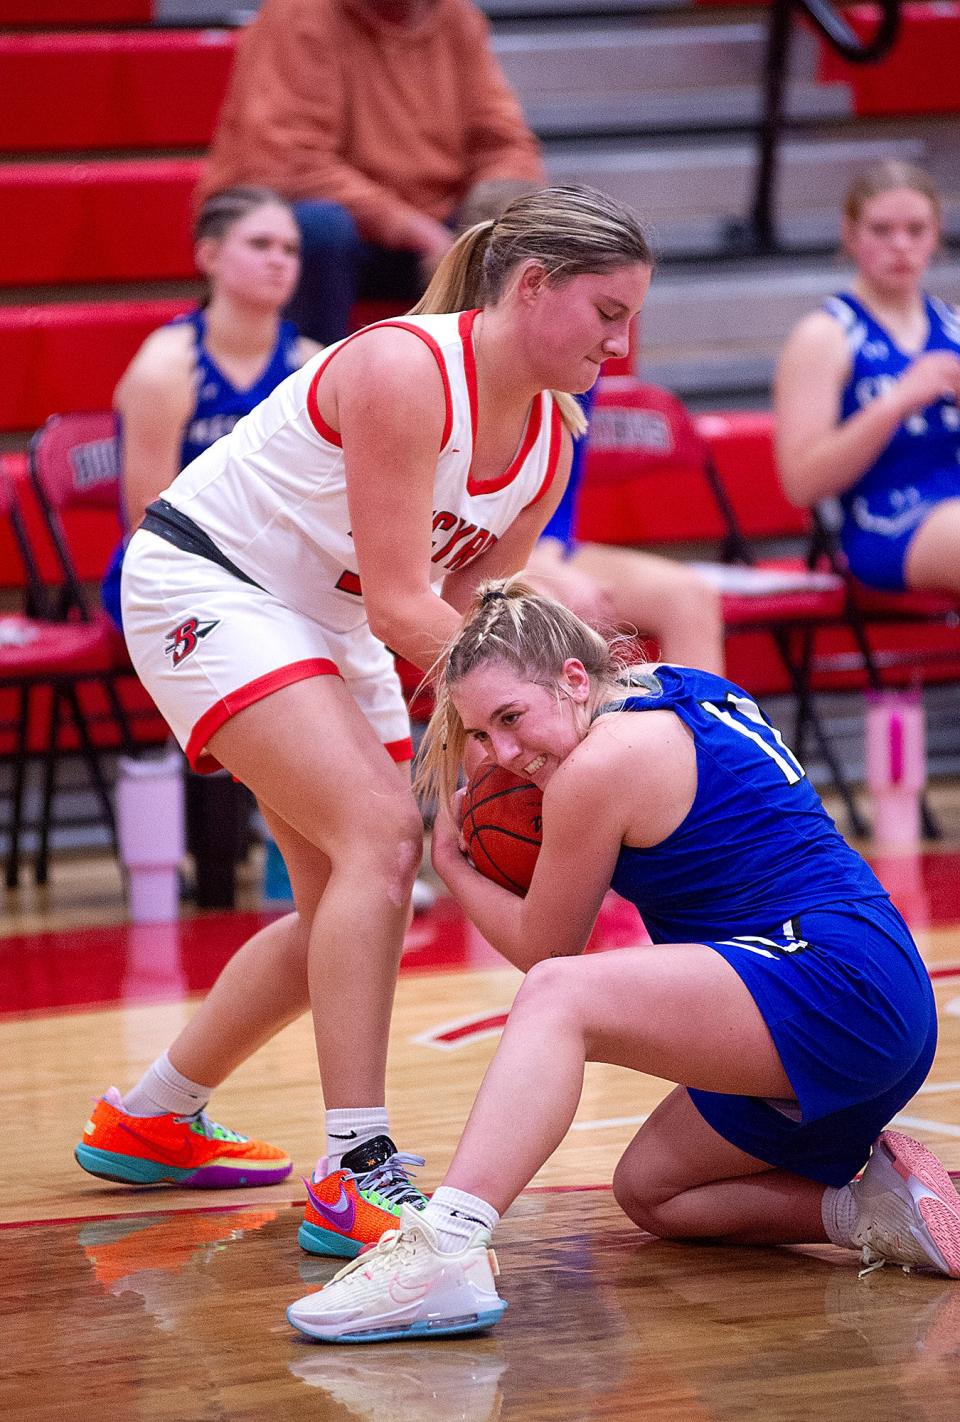 Bucyrus' Haylee Stratton and Crestline's Kennedi Sipes struggle for the ball.